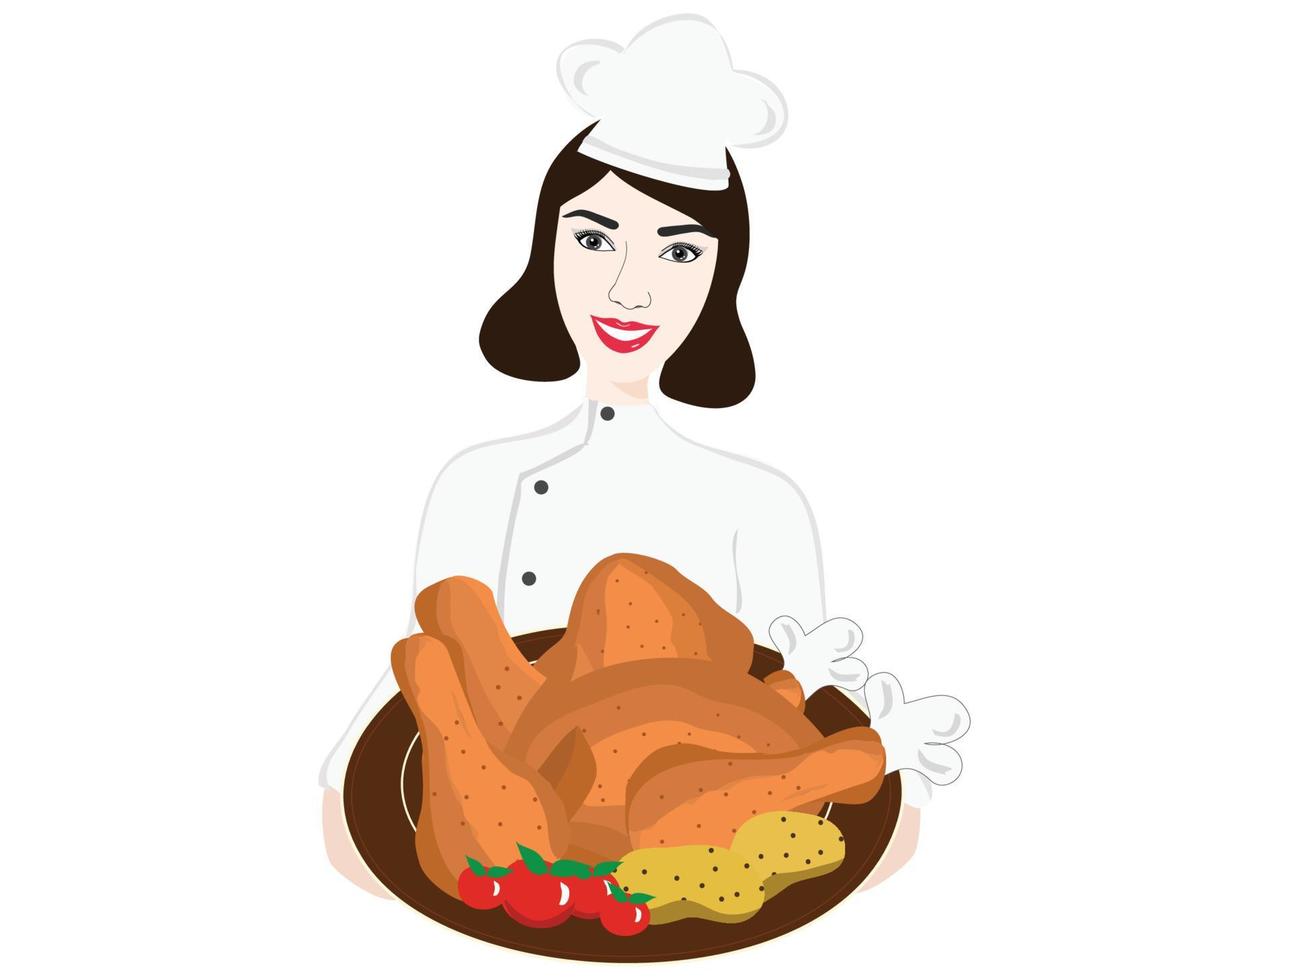 Beautiful woman chickens holding chicken, tomatoes and potatoes plate isolated vector illustration. Food cuisine background